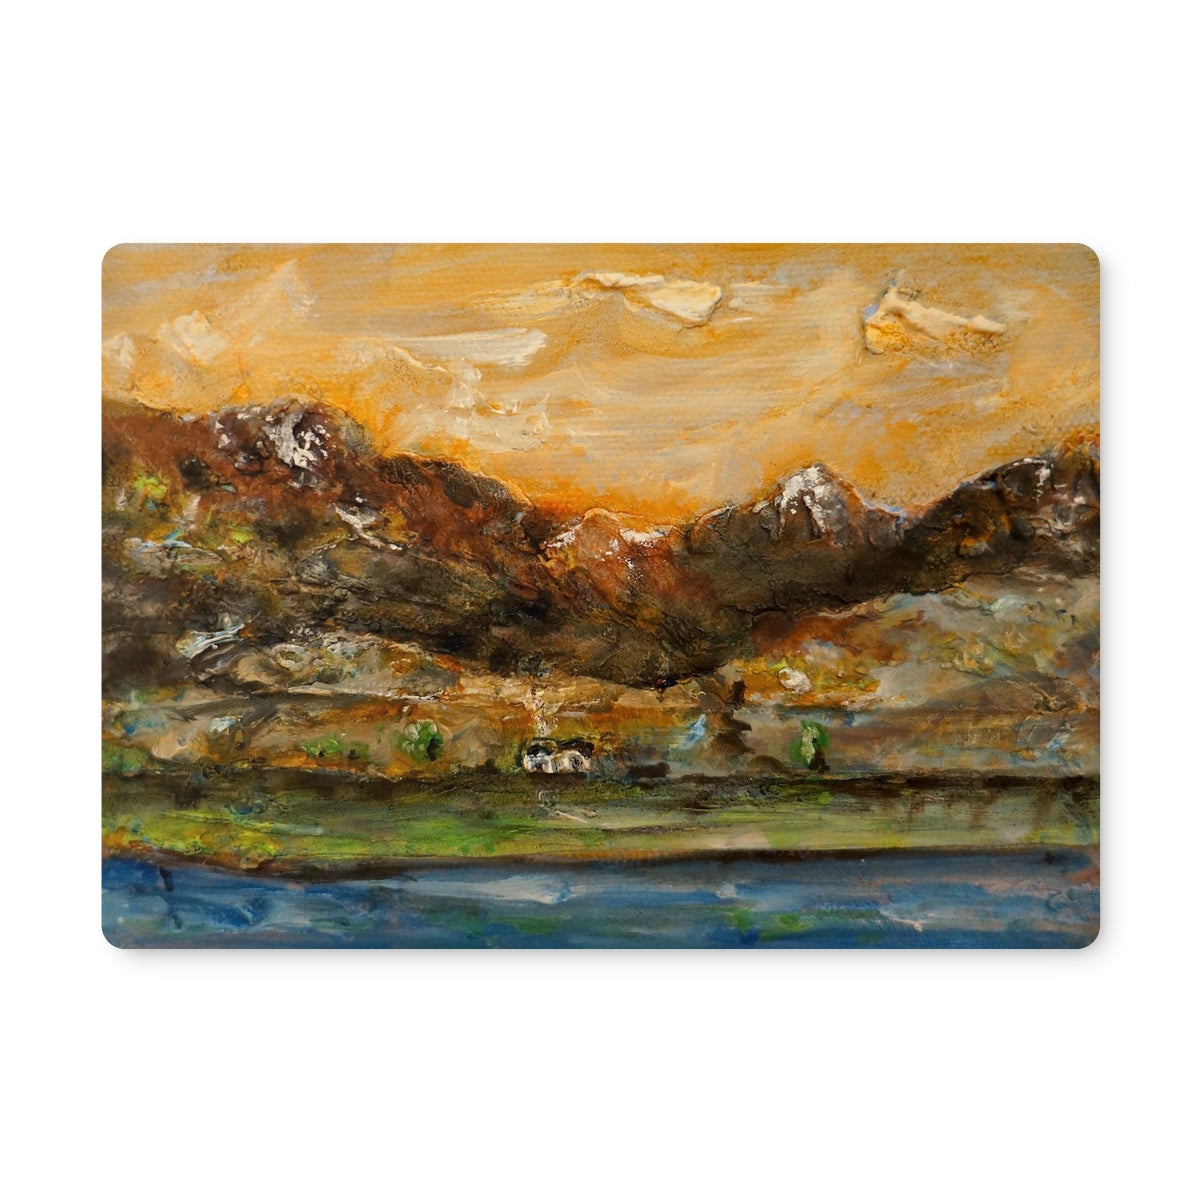 A Glencoe Cottage Art Gifts Placemat-Placemats-Glencoe Art Gallery-4 Placemats-Paintings, Prints, Homeware, Art Gifts From Scotland By Scottish Artist Kevin Hunter